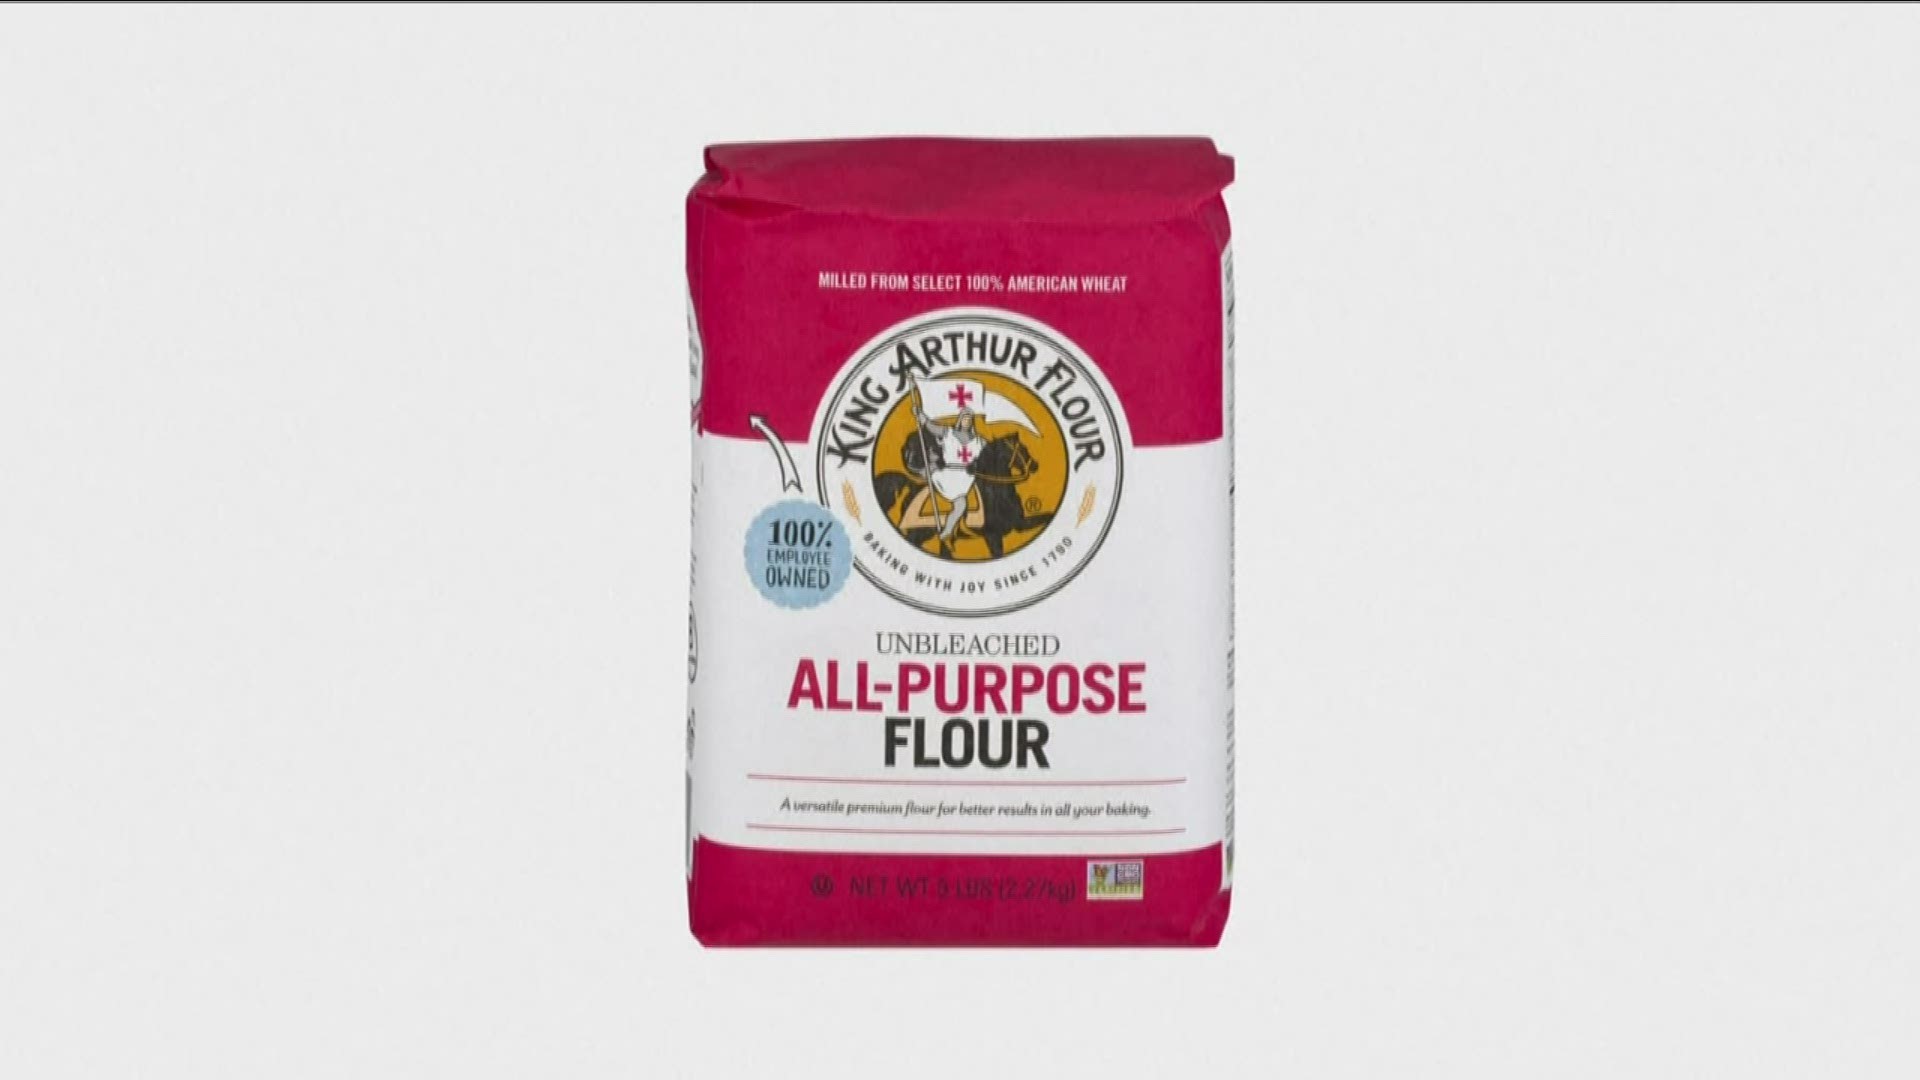 King Arthur Flour has voluntarily recalled more than 14,000 cases of 5 pound Unbleached All-Purpose Flour due to the potential presence of E. coli.